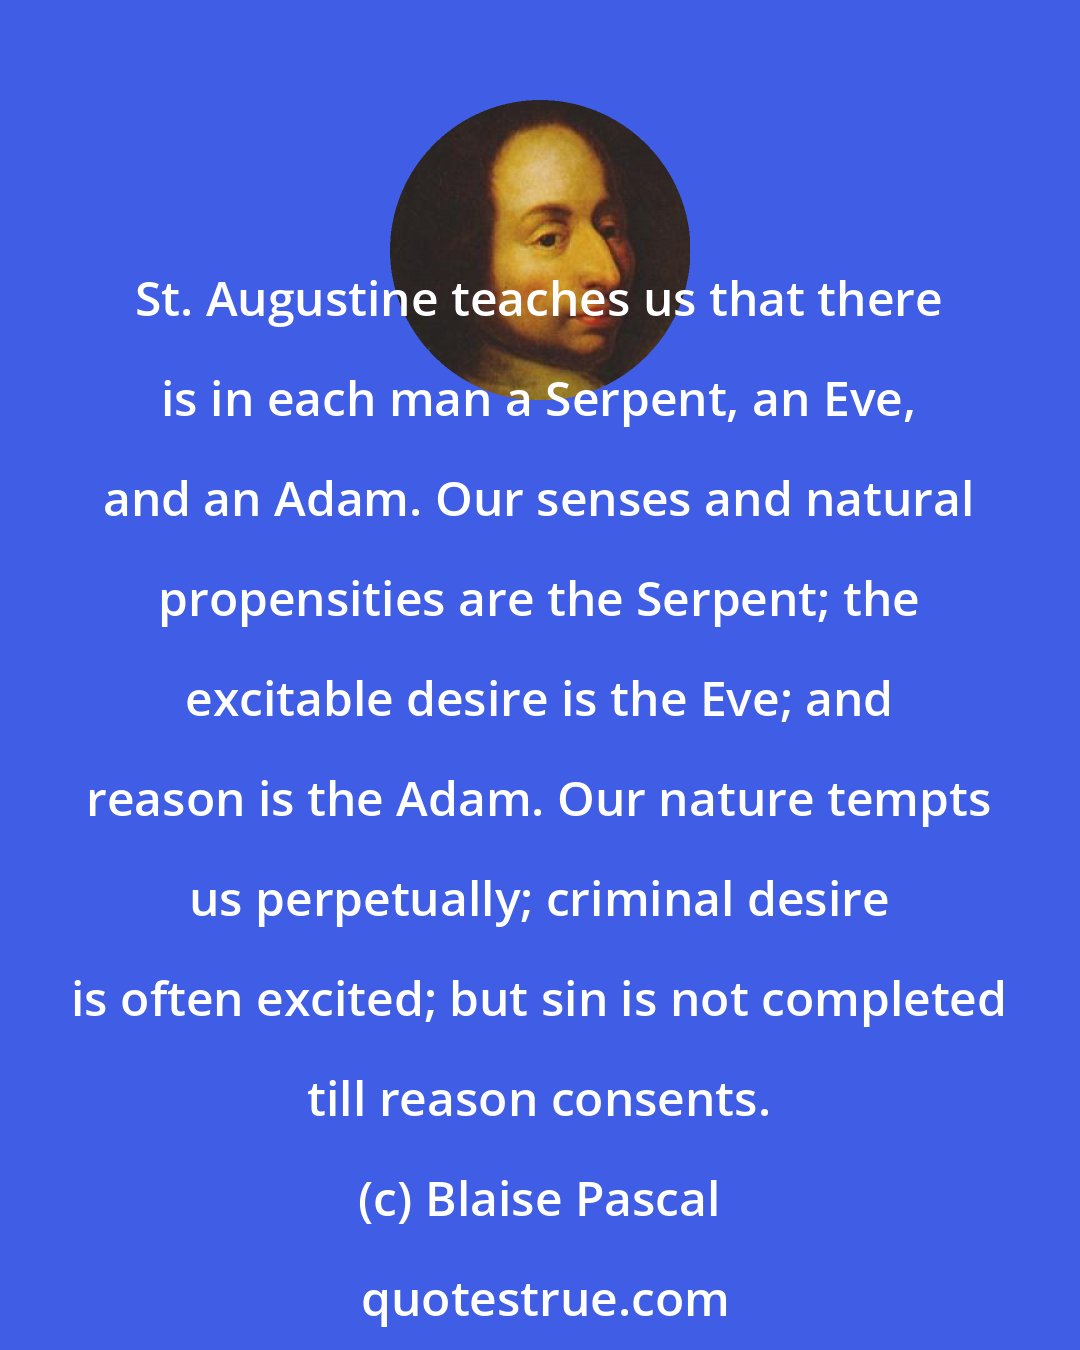 Blaise Pascal: St. Augustine teaches us that there is in each man a Serpent, an Eve, and an Adam. Our senses and natural propensities are the Serpent; the excitable desire is the Eve; and reason is the Adam. Our nature tempts us perpetually; criminal desire is often excited; but sin is not completed till reason consents.